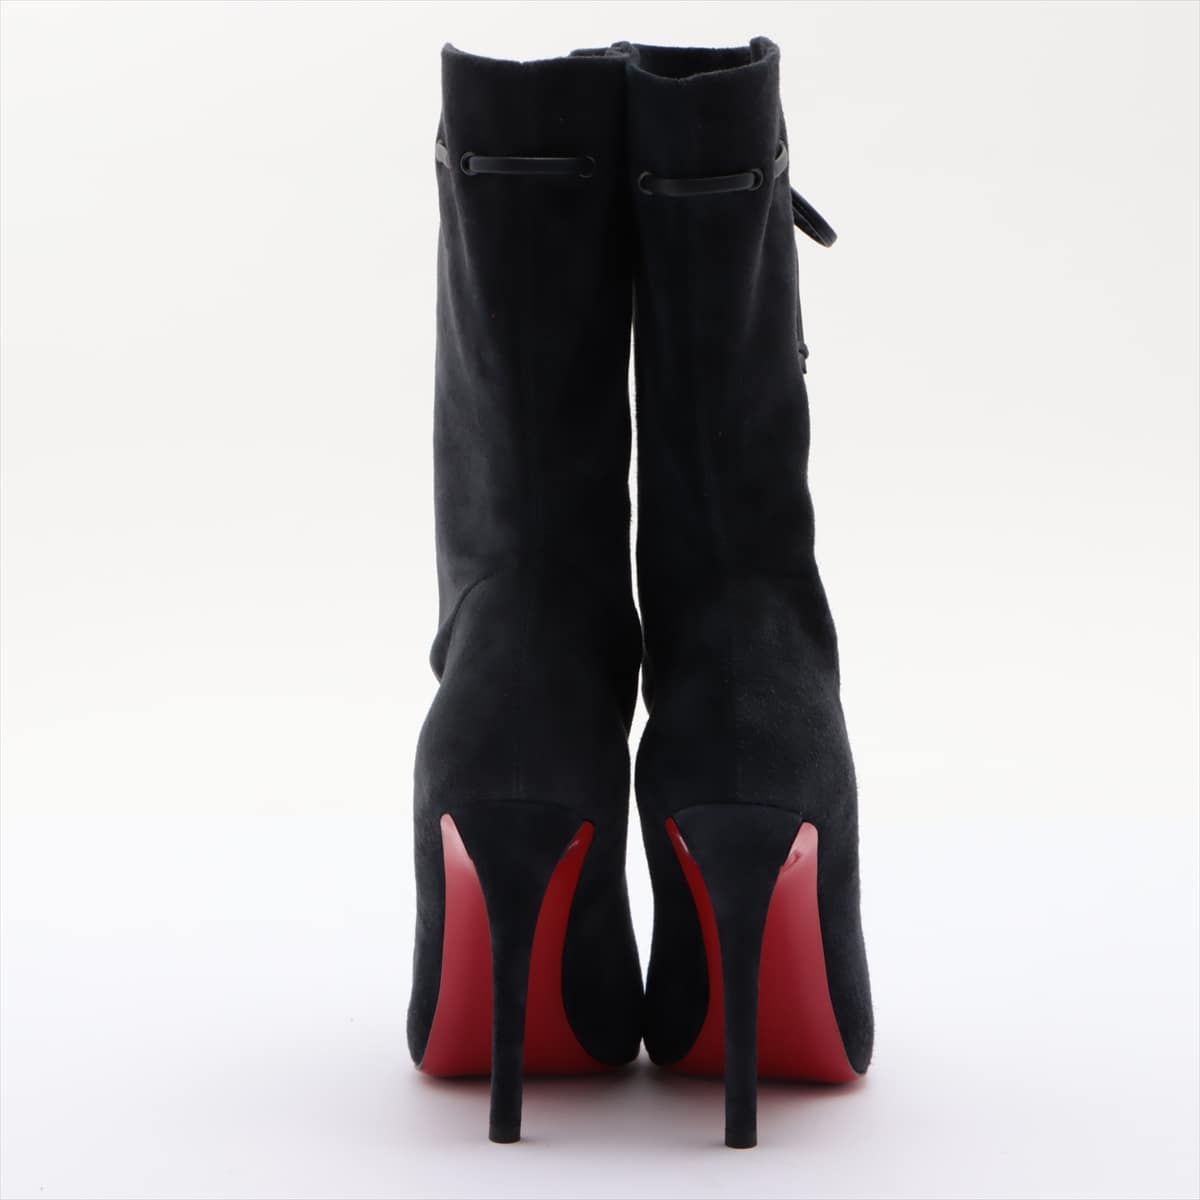 Christian Louboutin Suede Boots 35 1/2 Ladies' Navy blue Valentine 120mm 3150816